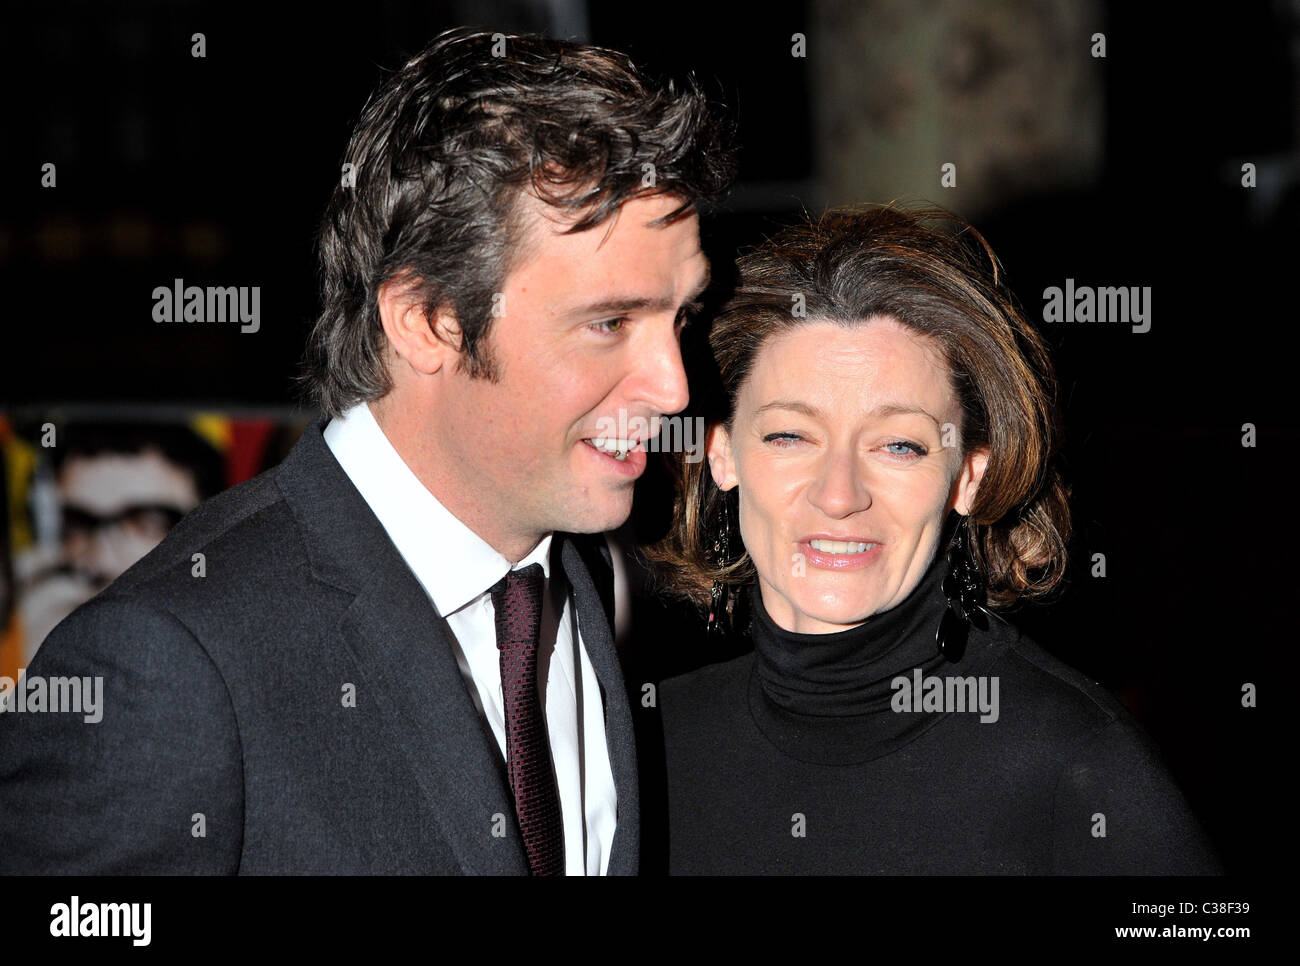 Michelle Gomez and Jack Davenport World Premiere of 'The Boat That Rocked' held at The Odeon, Leicester Square - arrivals Stock Photo